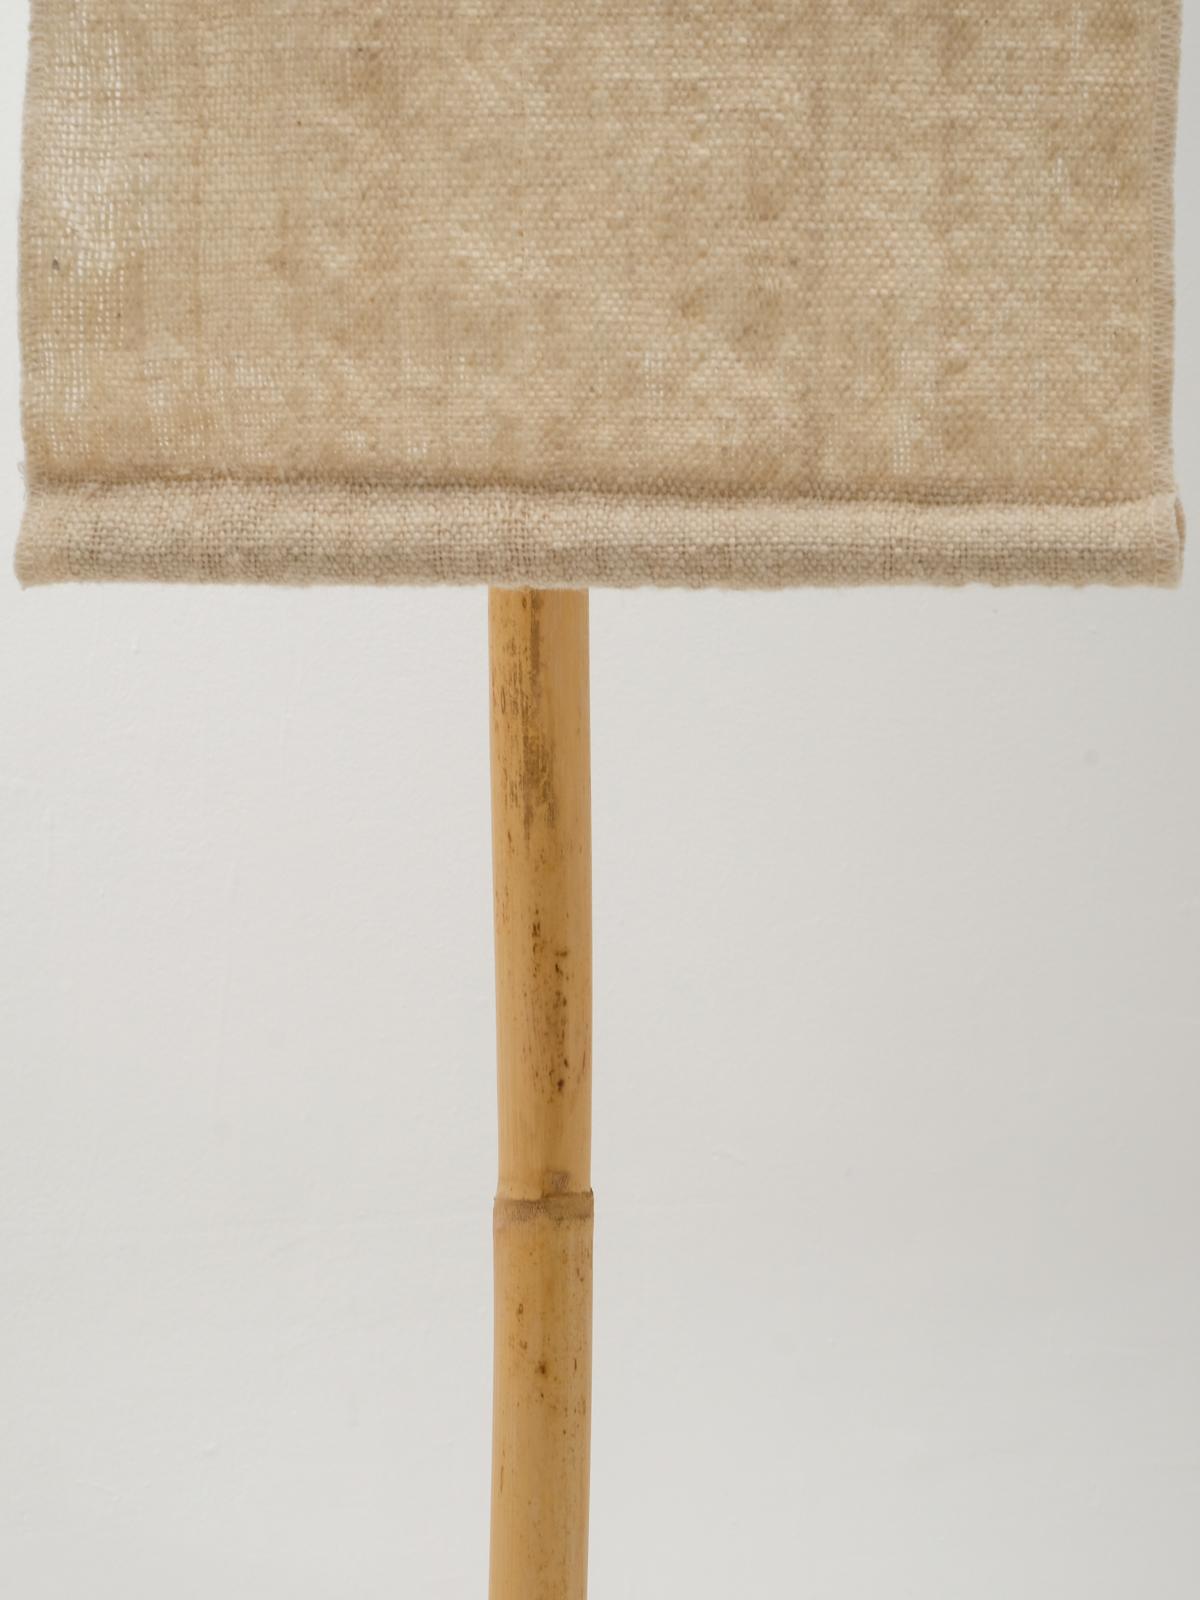 Azru Floor Lamp, Handspun, Handwoven Lampshade, Made of Local Rock & Reed In New Condition For Sale In Marseille, FR